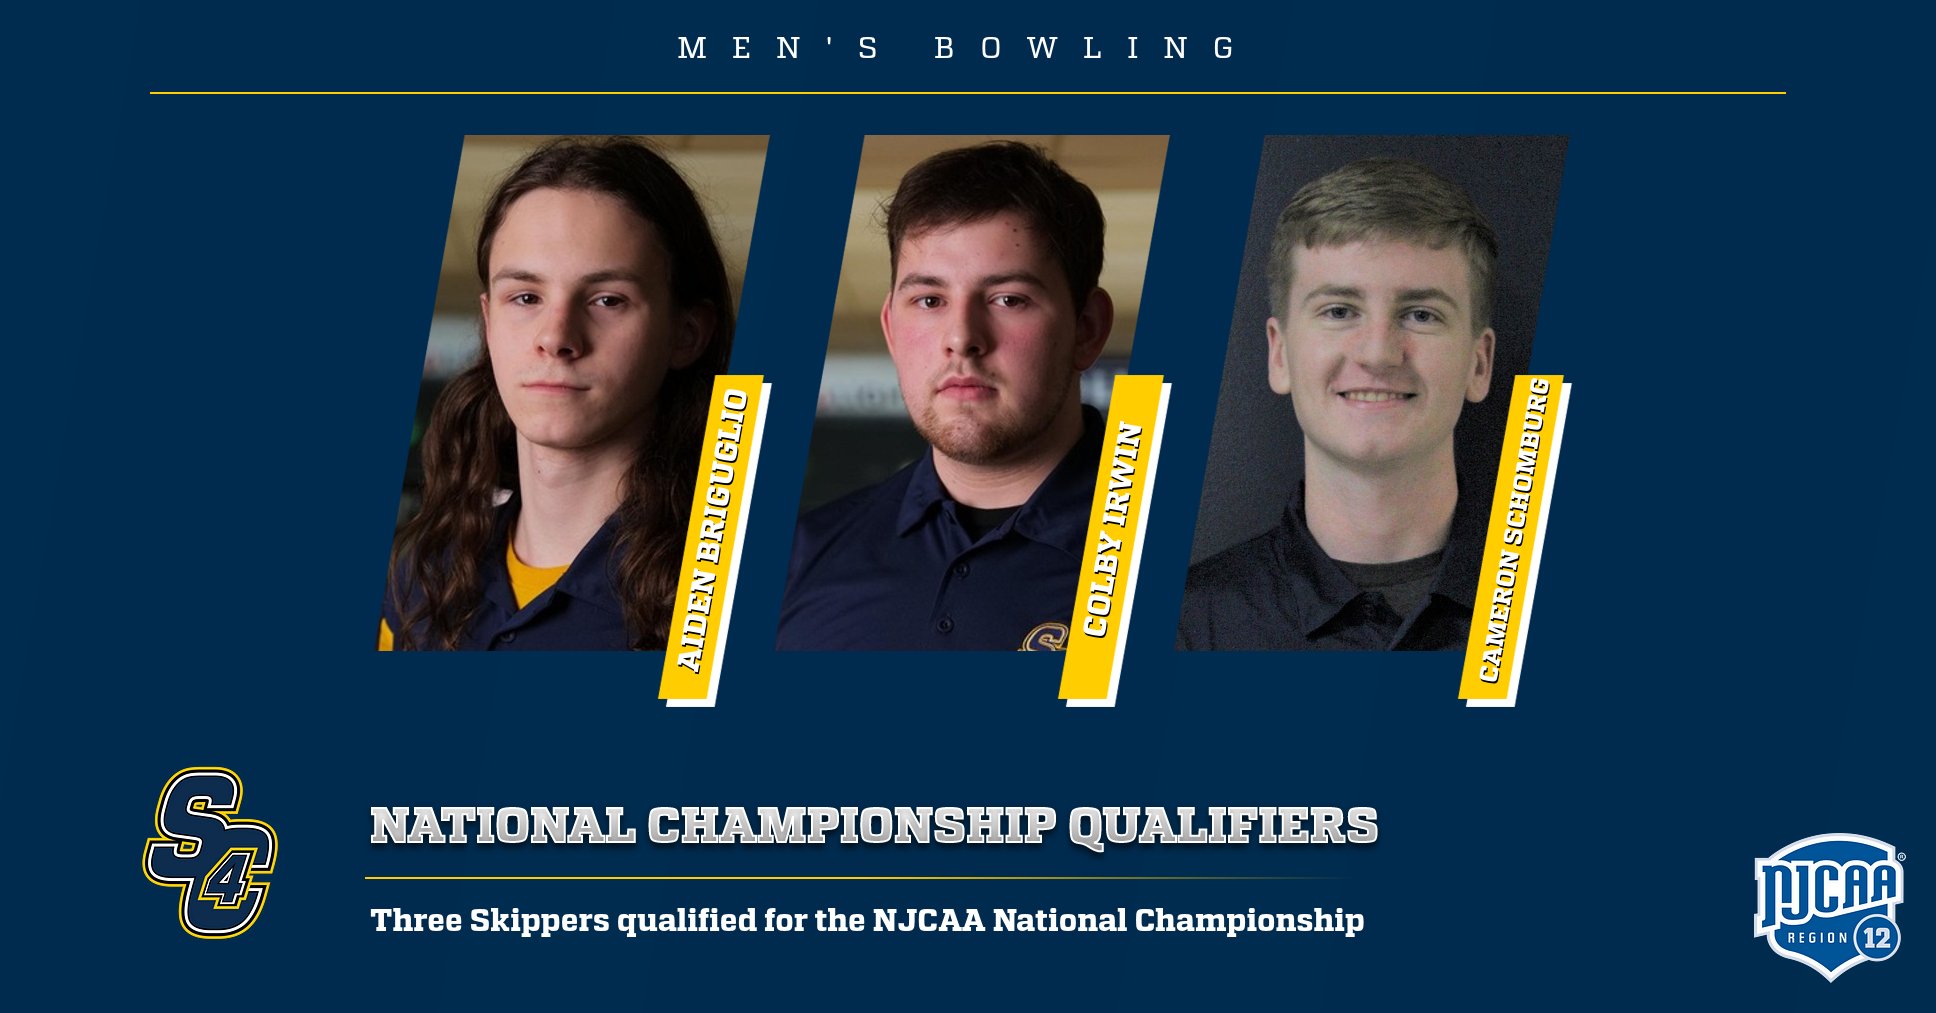 Men's Bowling: Three Skippers Qualify for NJCAA National Championship